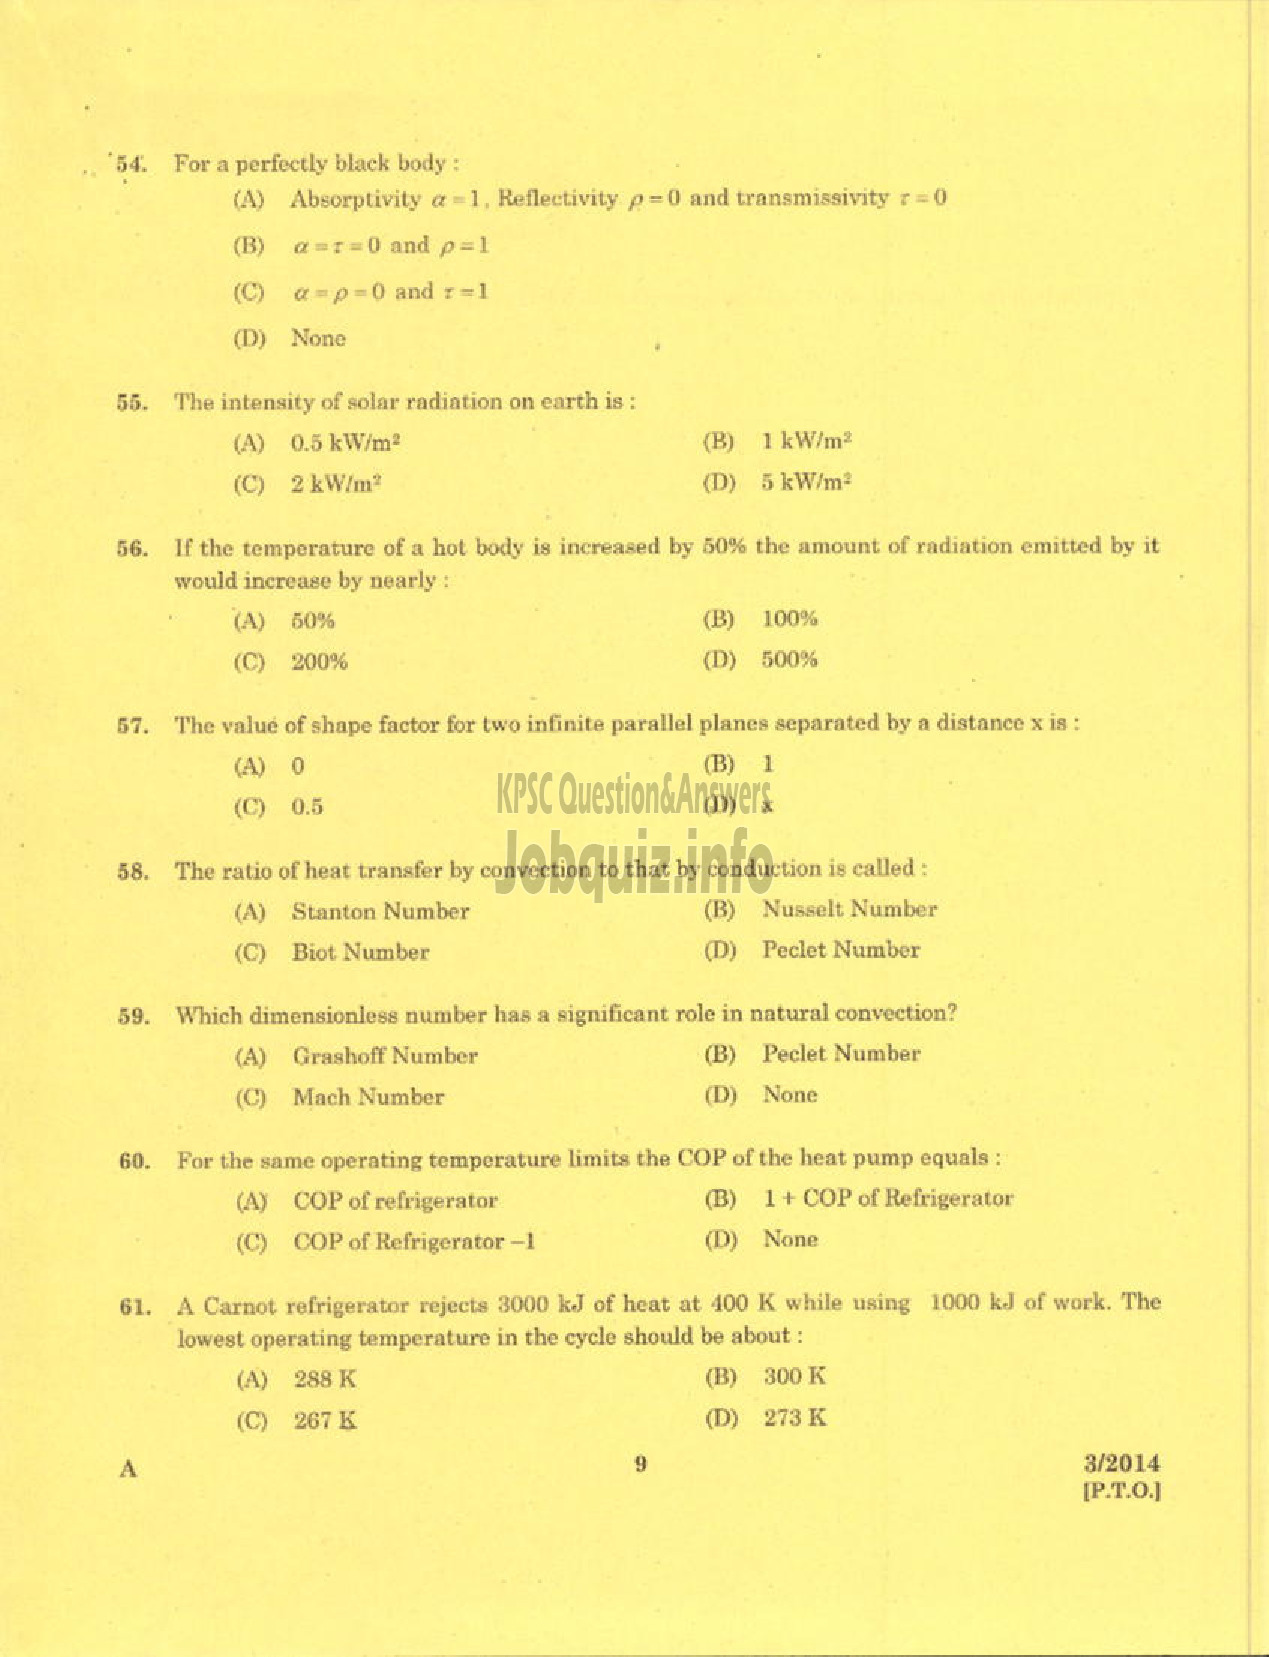 Kerala PSC Question Paper - LECTURER IN MACHANICAL ENGINEERING POLYTECHNICS TECHNICAL EDUCATION-7